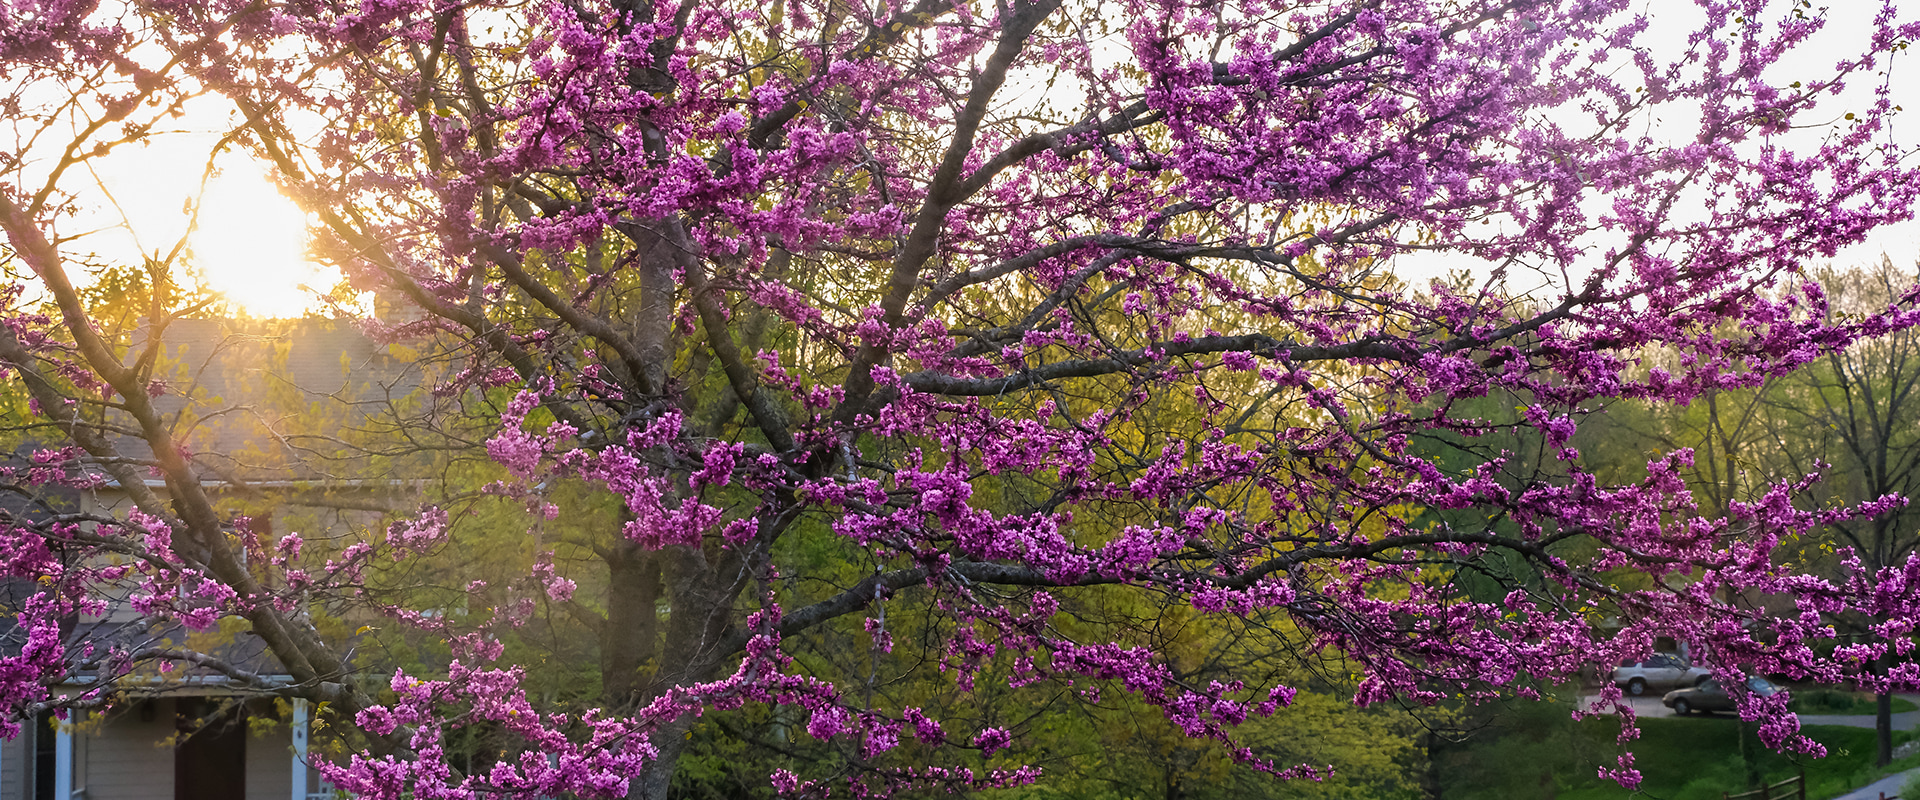 15 Best Trees for Landscaping Your Backyard